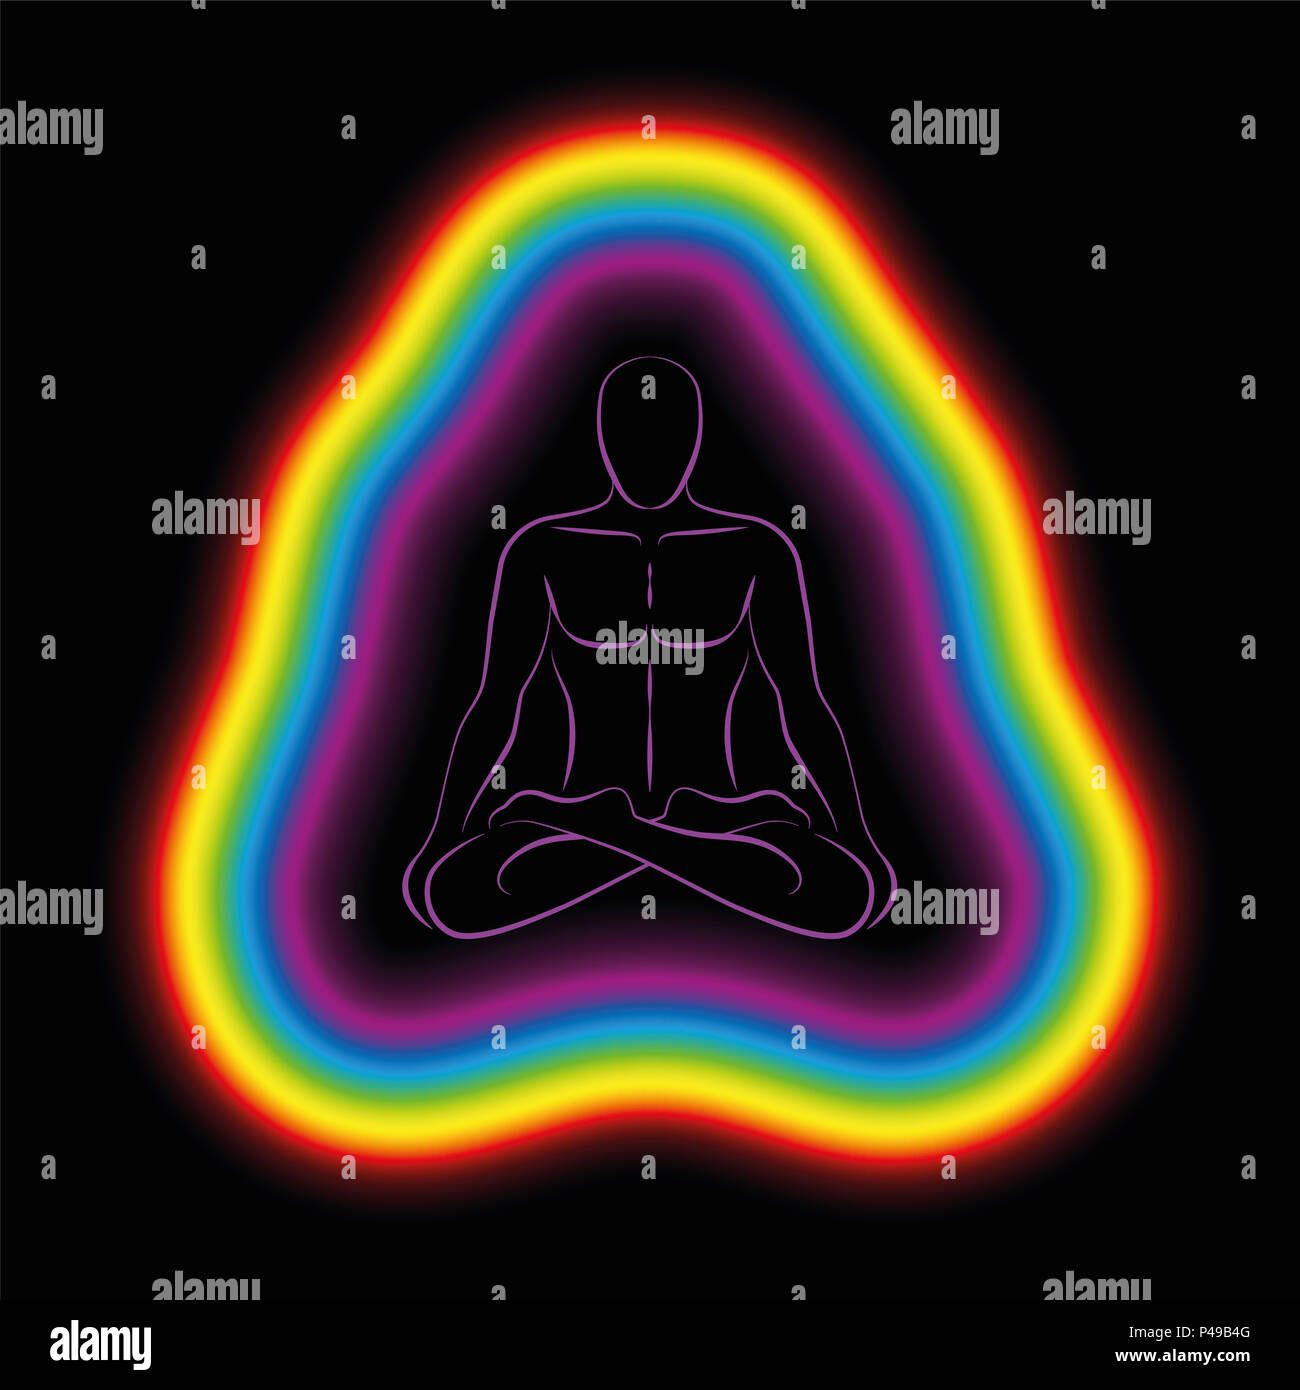 Meditating man in yoga position with colorful aura or subtle body - illustration on black background. Stock Photo